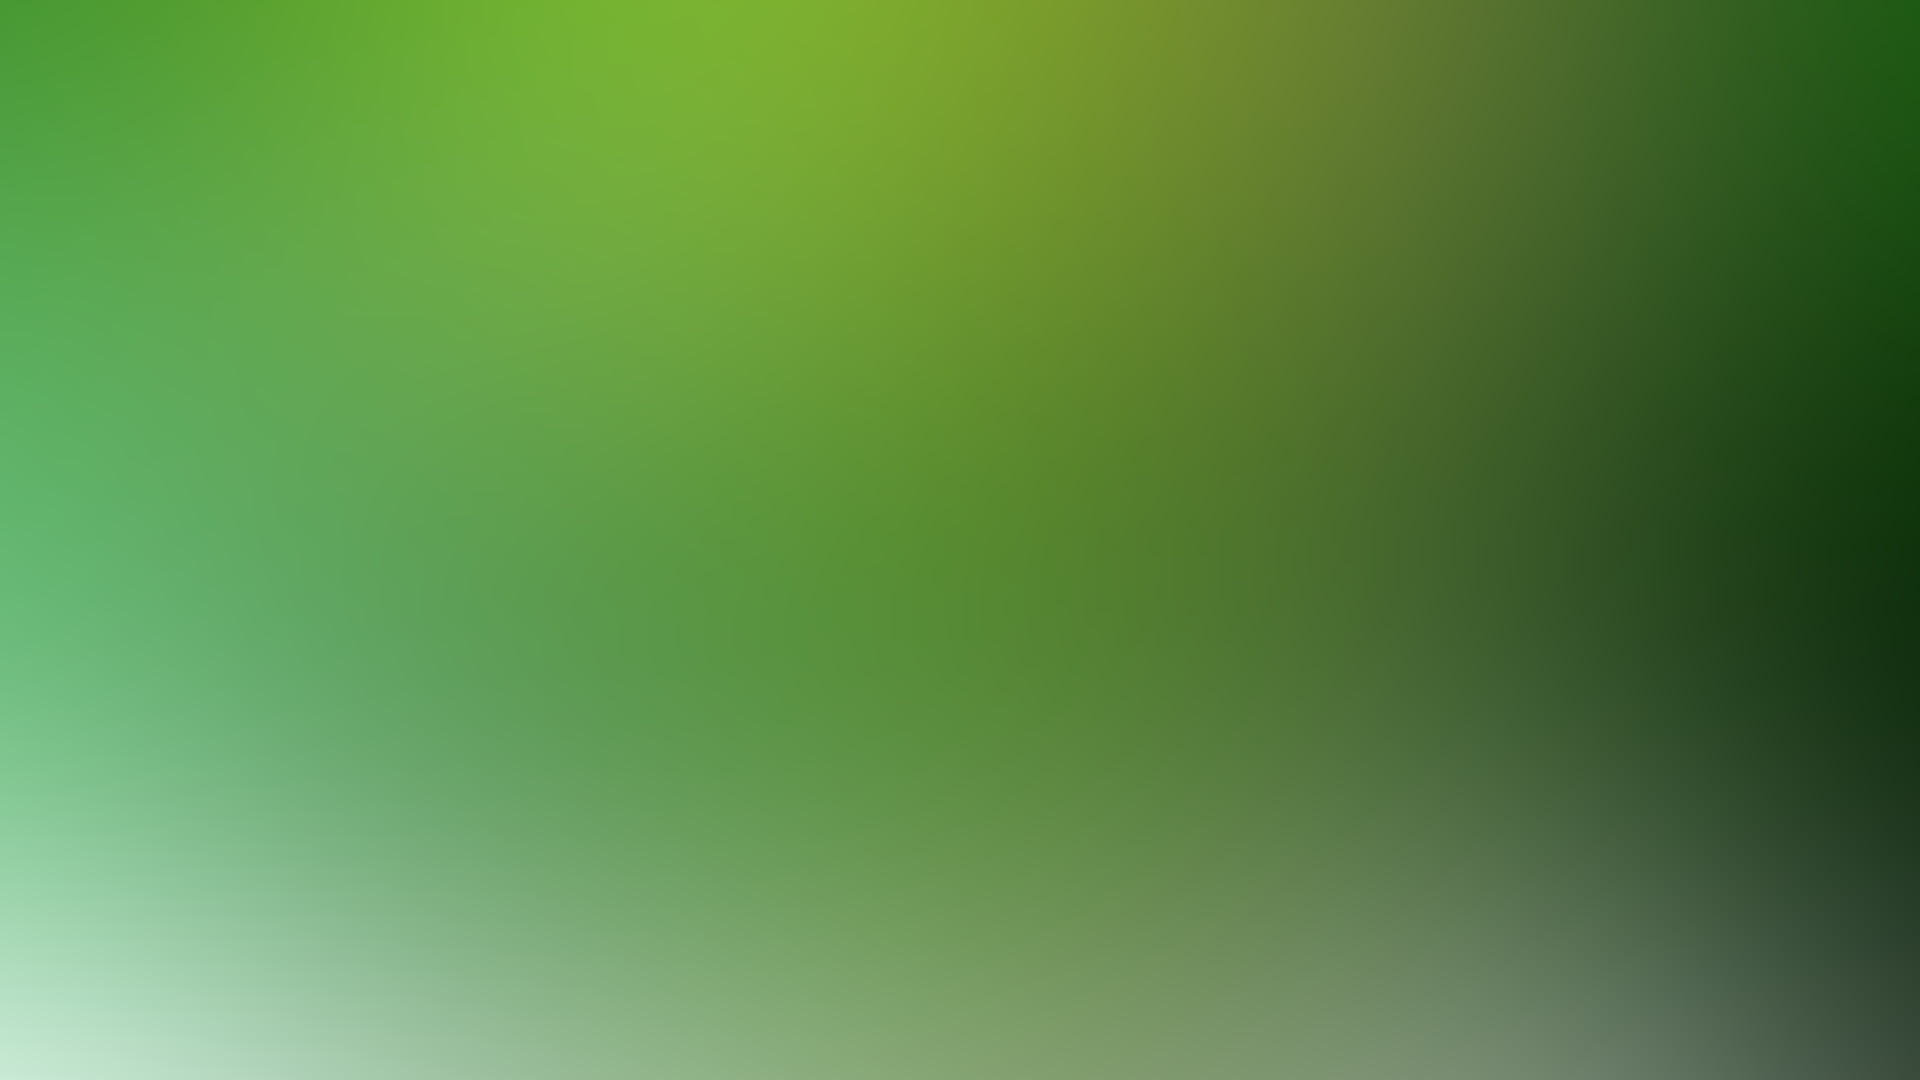 Green And White Gradient - HD Wallpaper 